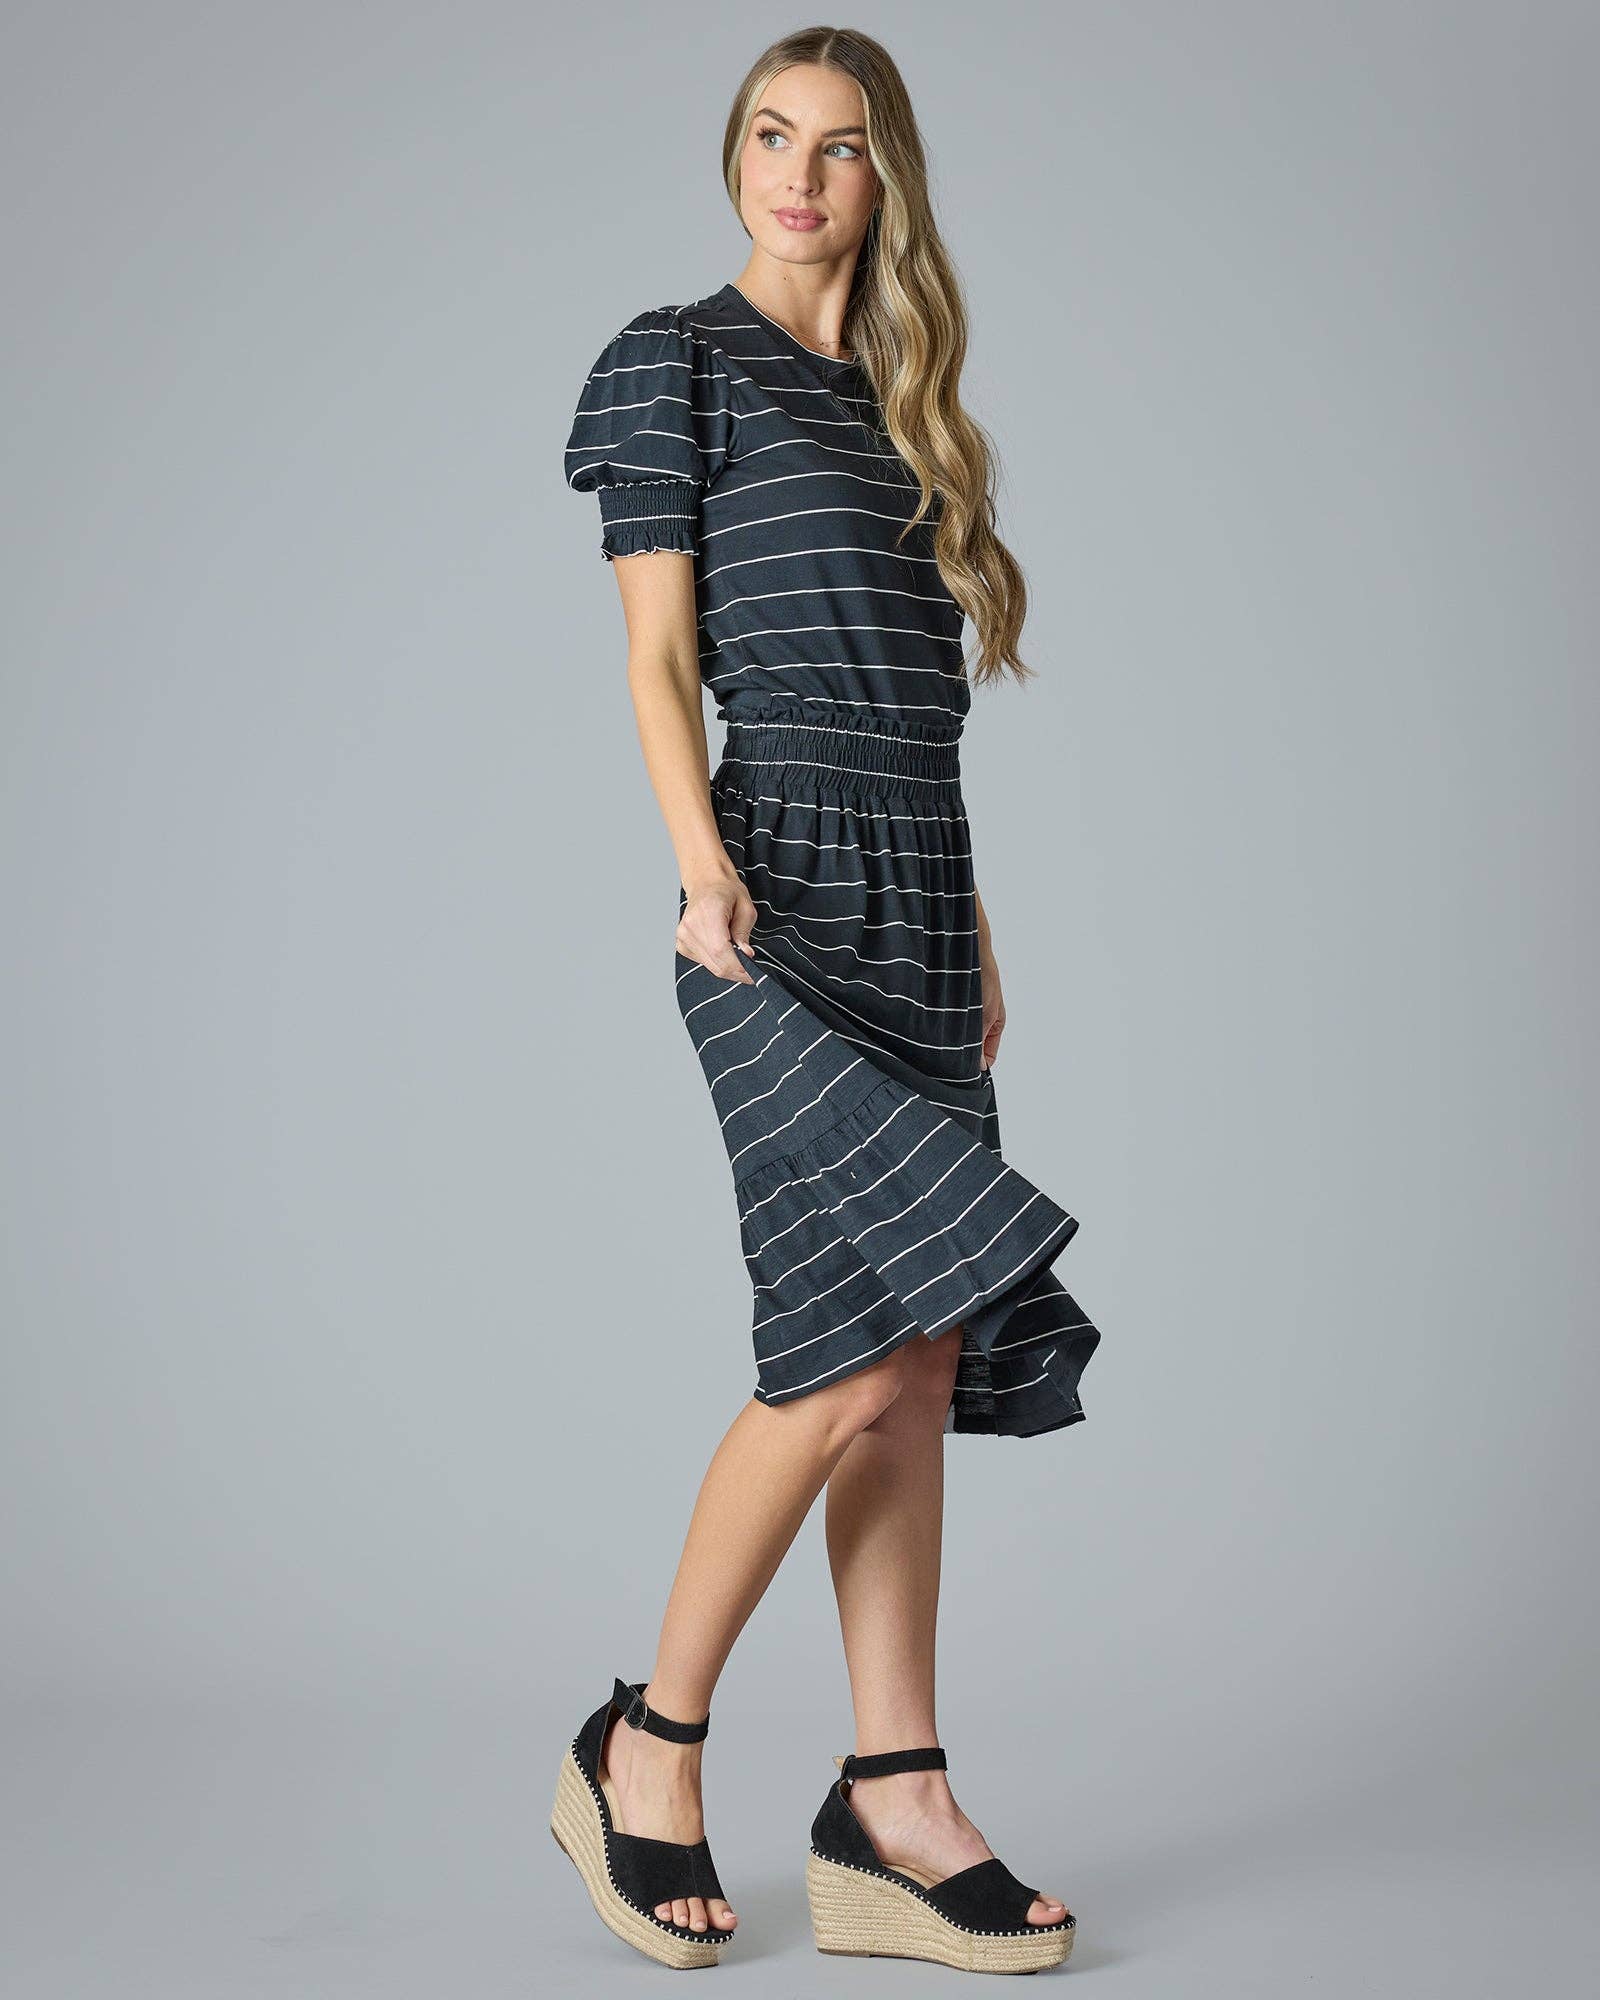 Tres Belle Skirt In Black with White Stripes Spring-Summer Downeast